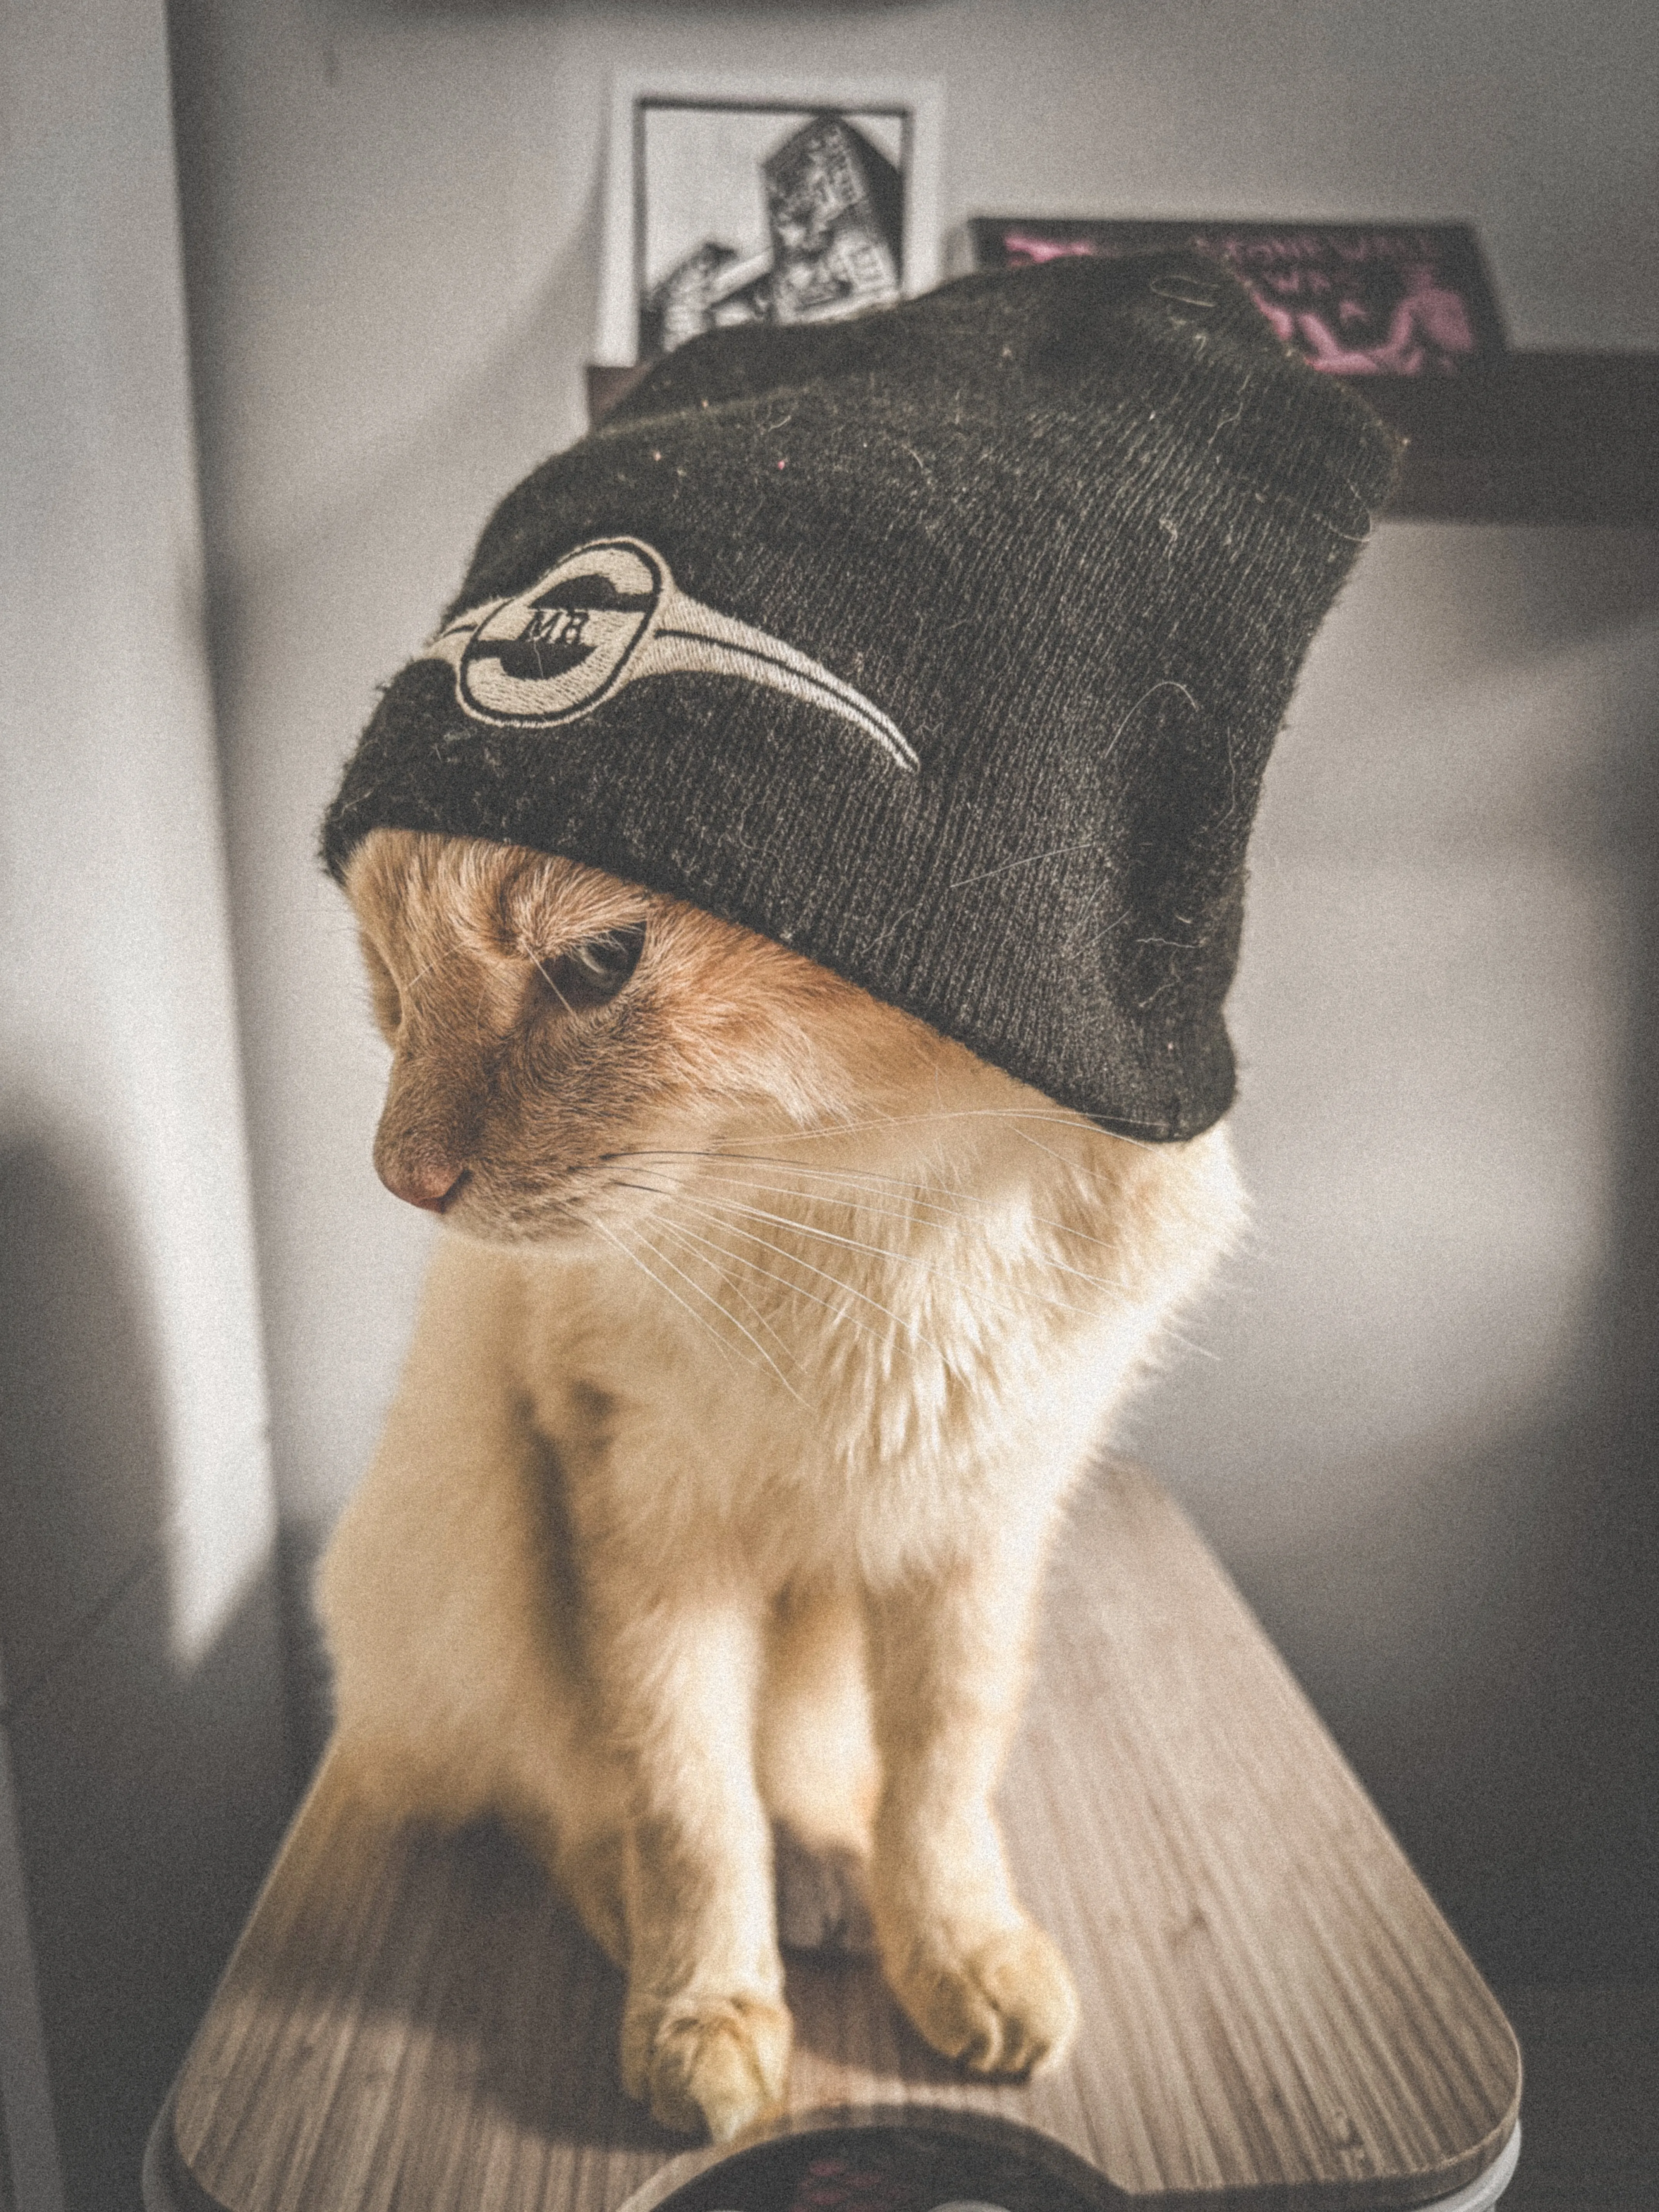 My cat Tybalt, a white flamepoint Tabby/Siamese mix sits on a wooden platform while looking off to the side dejectedly while wearing a full-sized black skullcap beanie from Mr. S Leather that i placed on him moments ago.